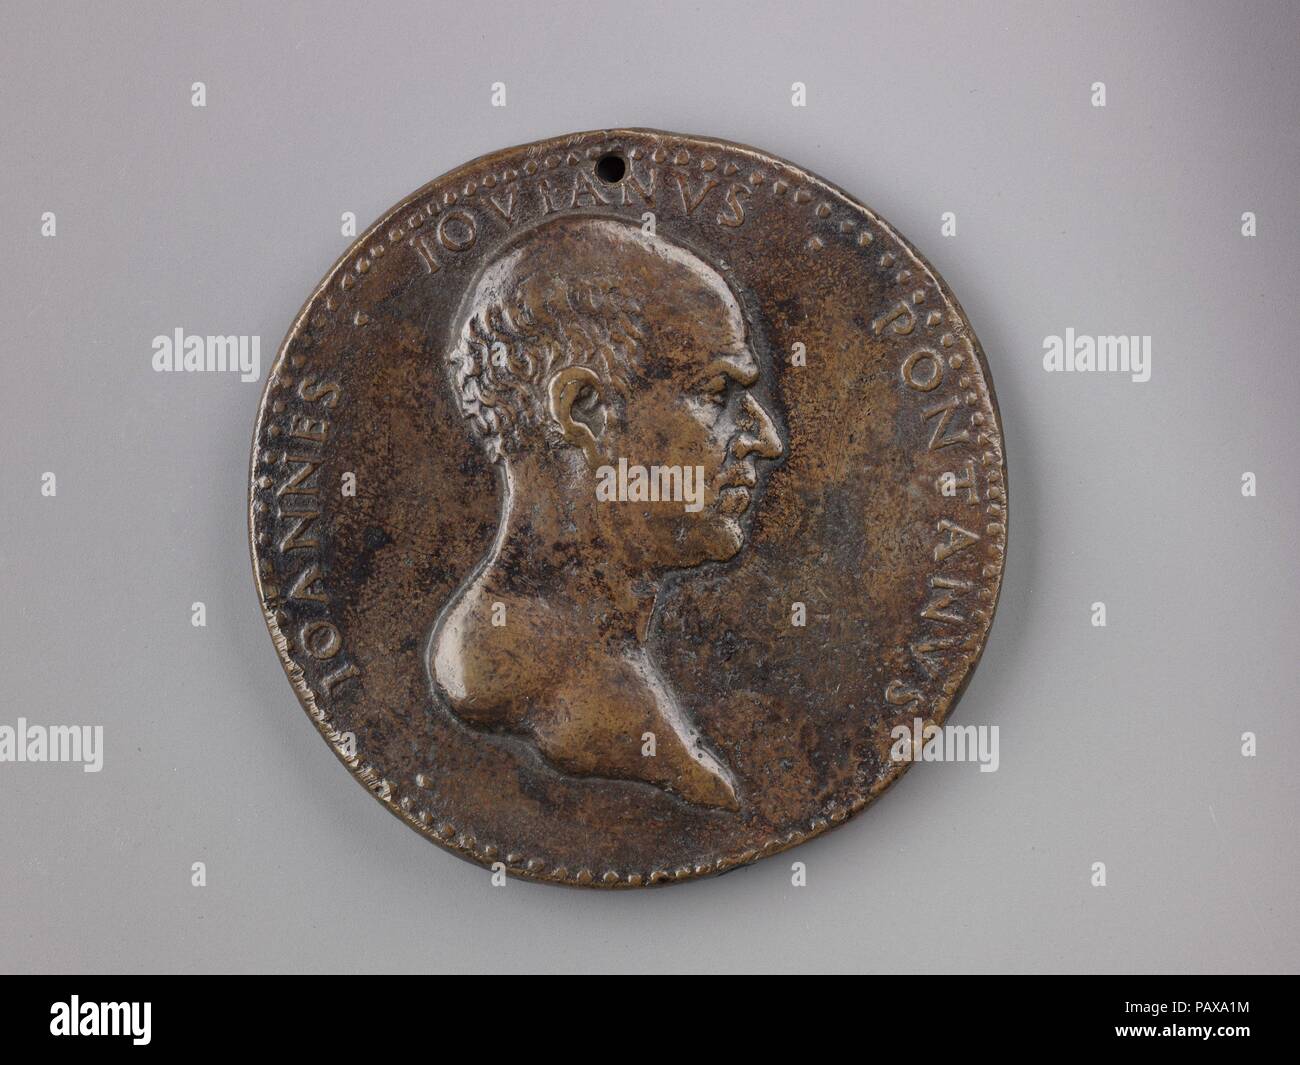 Portrait medal of Giovanni Giovano Pontano. Artist: Adriano Fiorentino (Adriano di Giovanni de' Maestri) (Italian, Florence (?) born ca. 1450-60, died 1499 Florence). Dimensions: Diam. 8.4 cm, wt. 219.38 g.. Date: model last quarter 15th century (cast 16th century).  Giovanni Gioviano Pontano was a humanist and prolific writer in Latin. He was also an educator at the royal house of Aragon in Naples, where he served as tutor to Ferdinand II and secretary to his mother, Ippolita Sforza. Pontano later turned against his Aragonese patrons in writings endorsing their enemy, Louis XII of France.   T Stock Photo